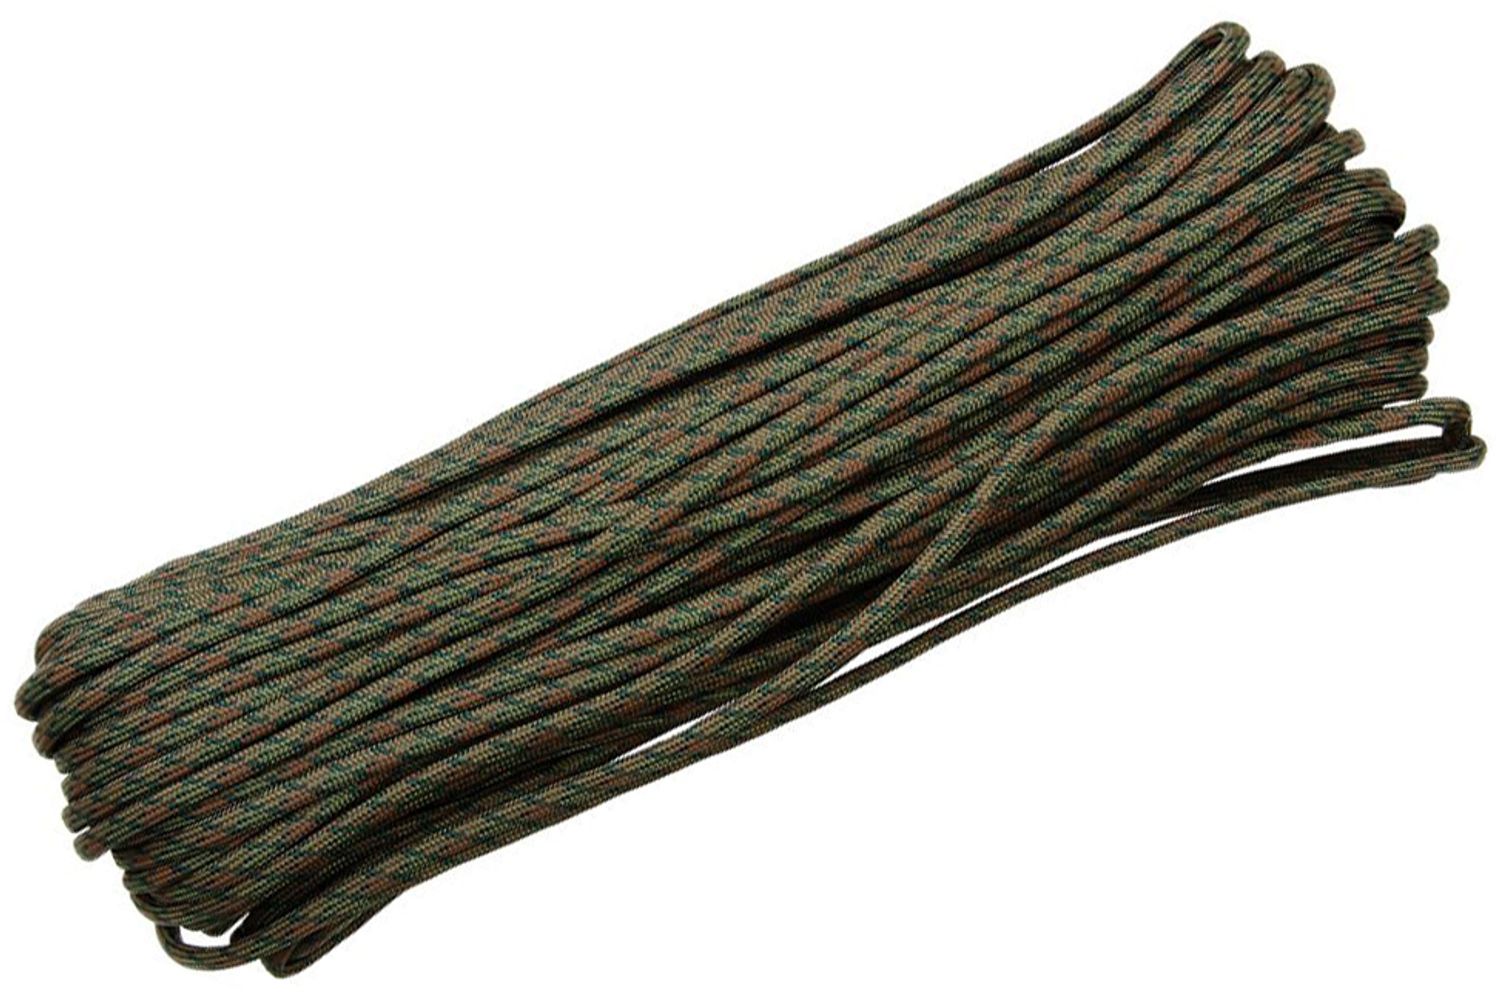 Atwood Rope 550 Paracord, Wetland, 100 Feet - KnifeCenter - RG1048H